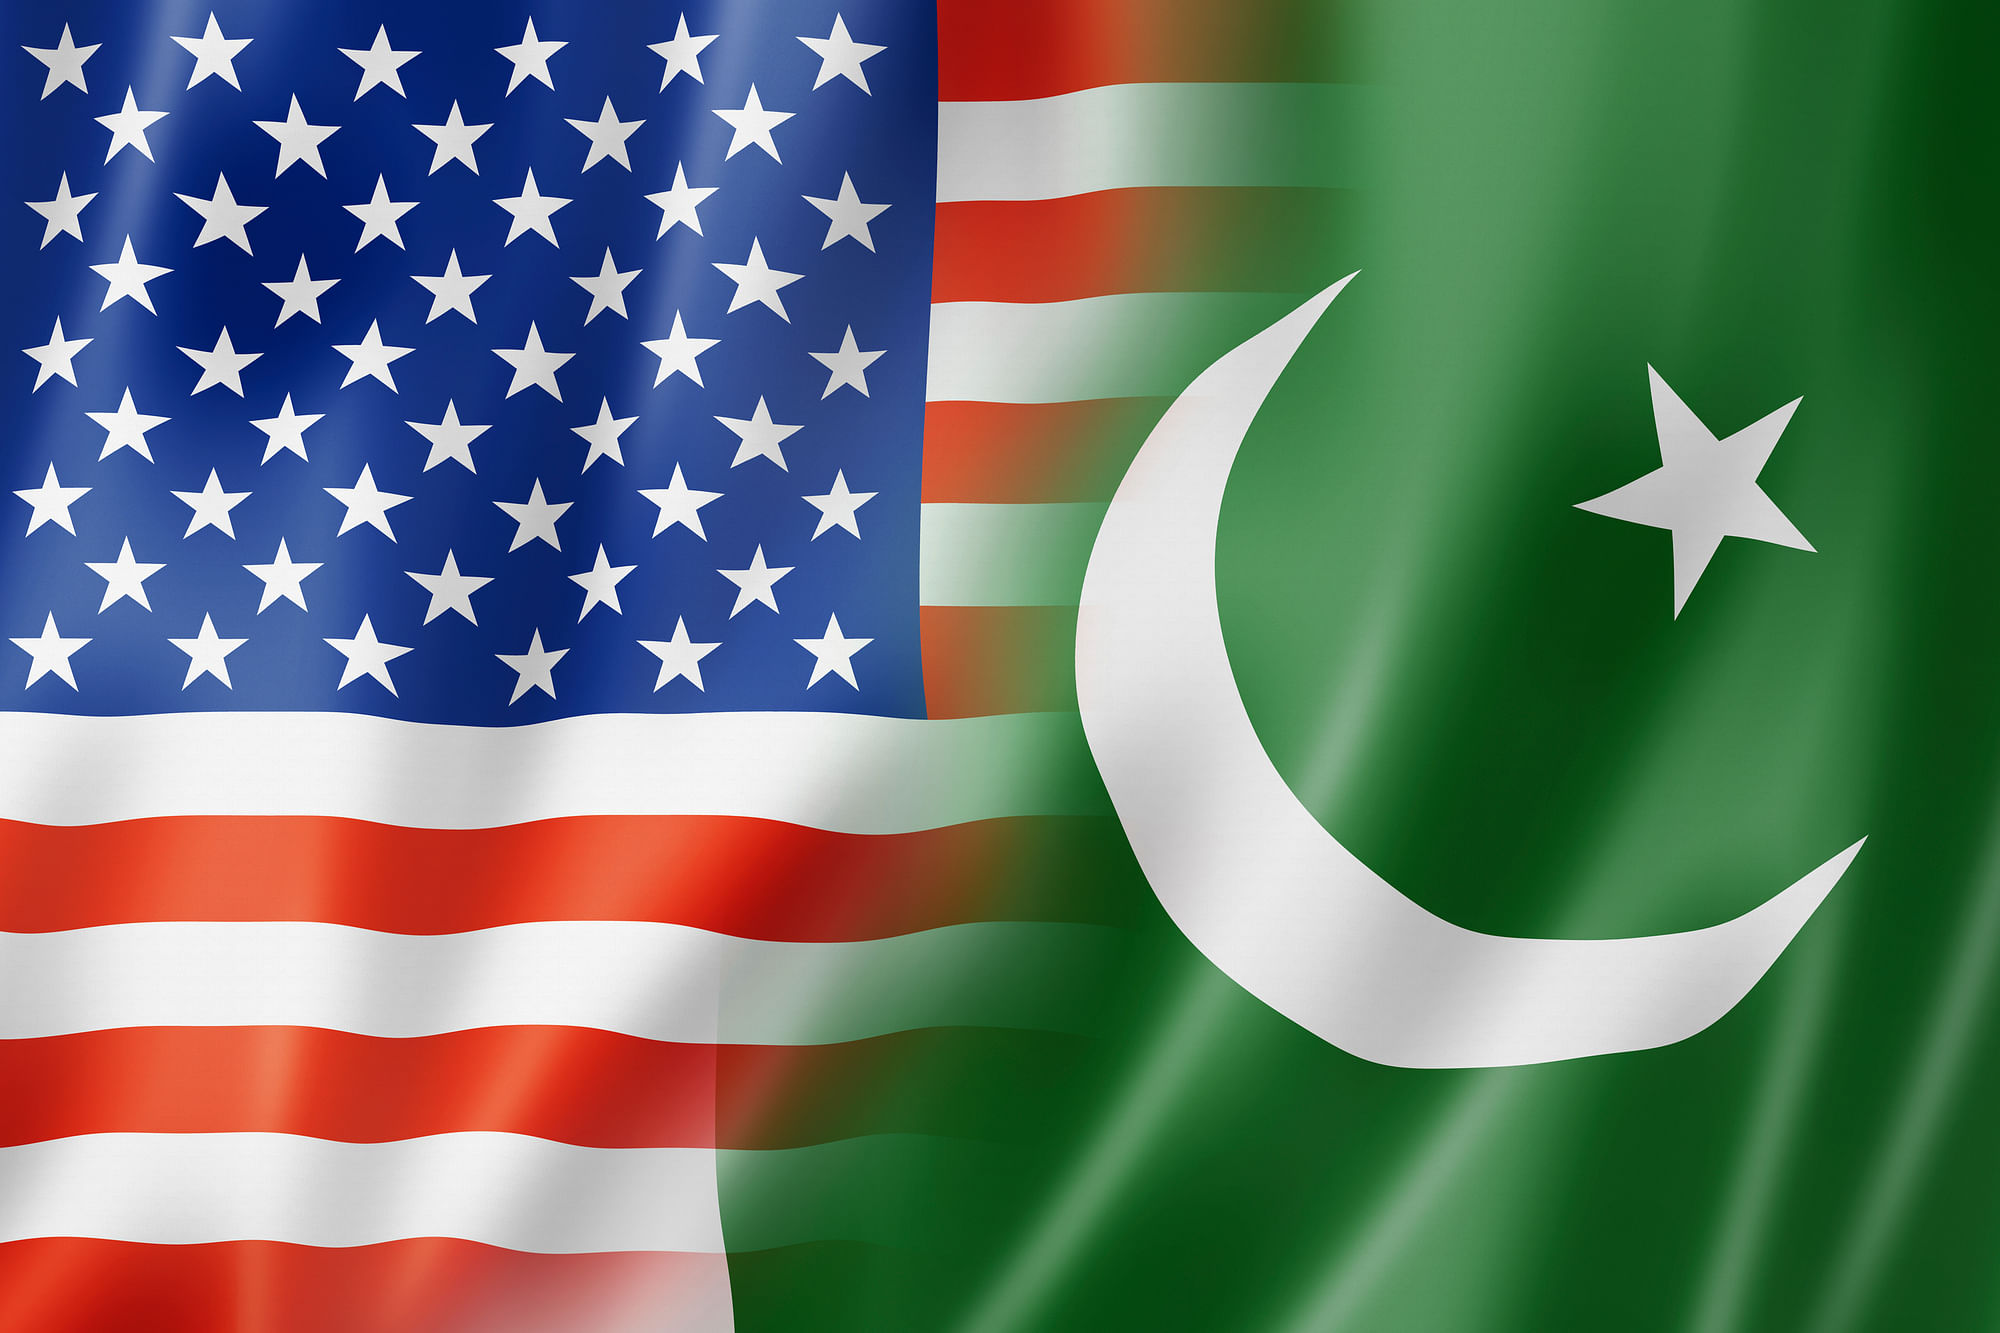 The hearing is titled “Pakistan: Friend or Foe in the Fight Against Terrorism?” (Photo: iStockphoto)